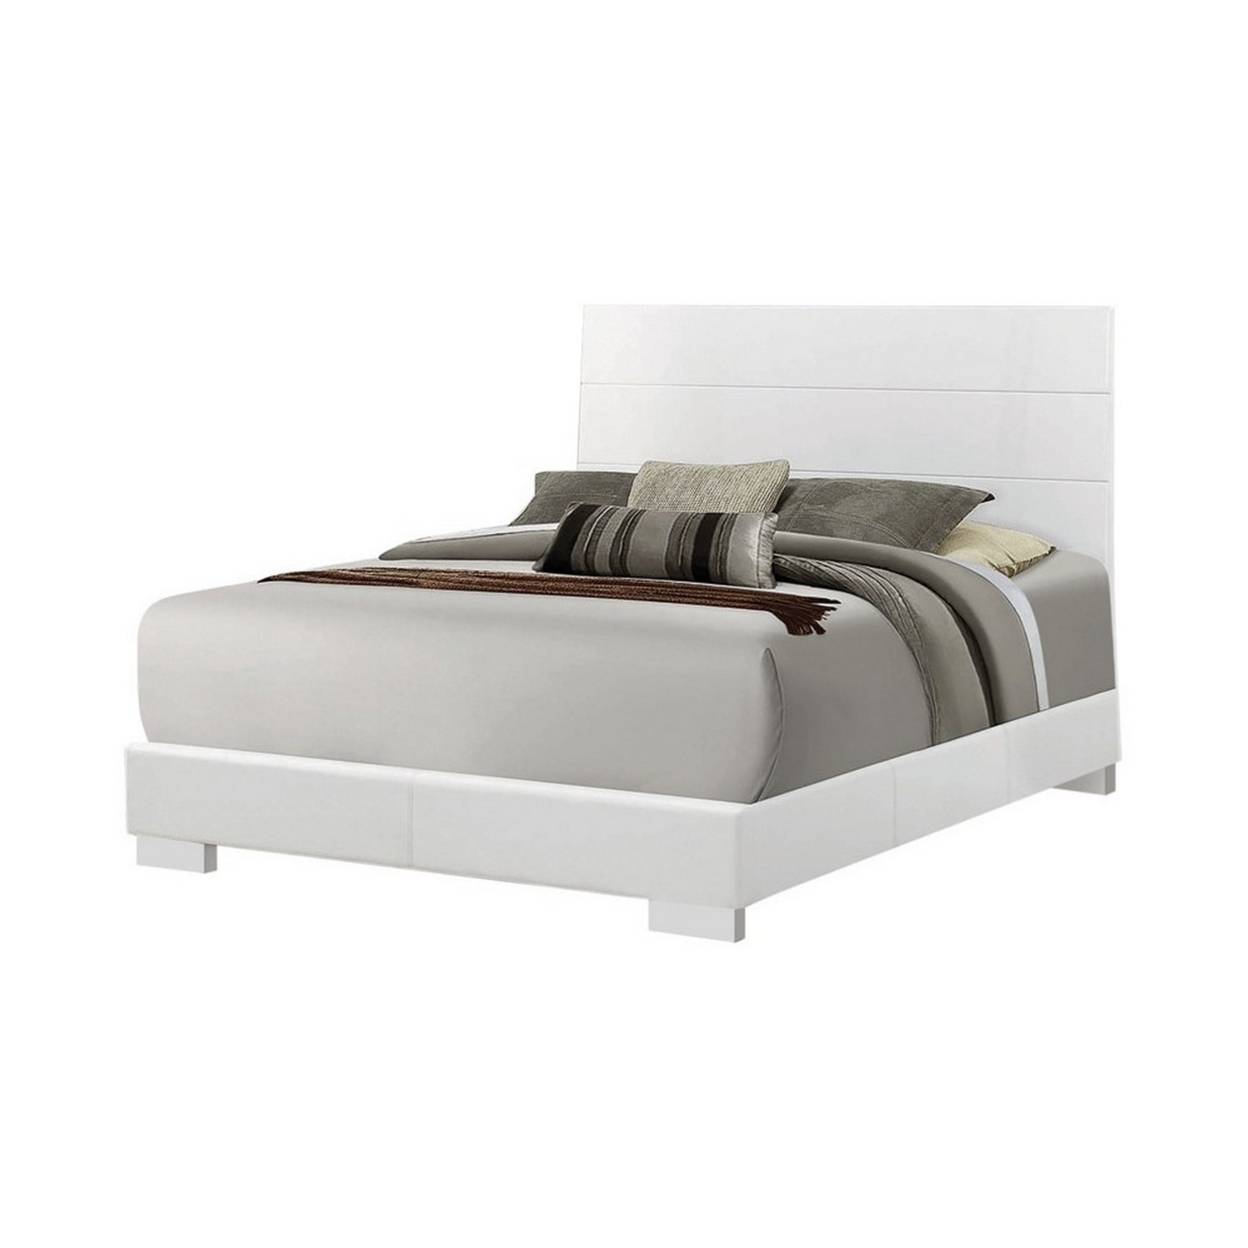 Contemporary Style Low Profile California King Bed With Block Feet, White- Saltoro Sherpi